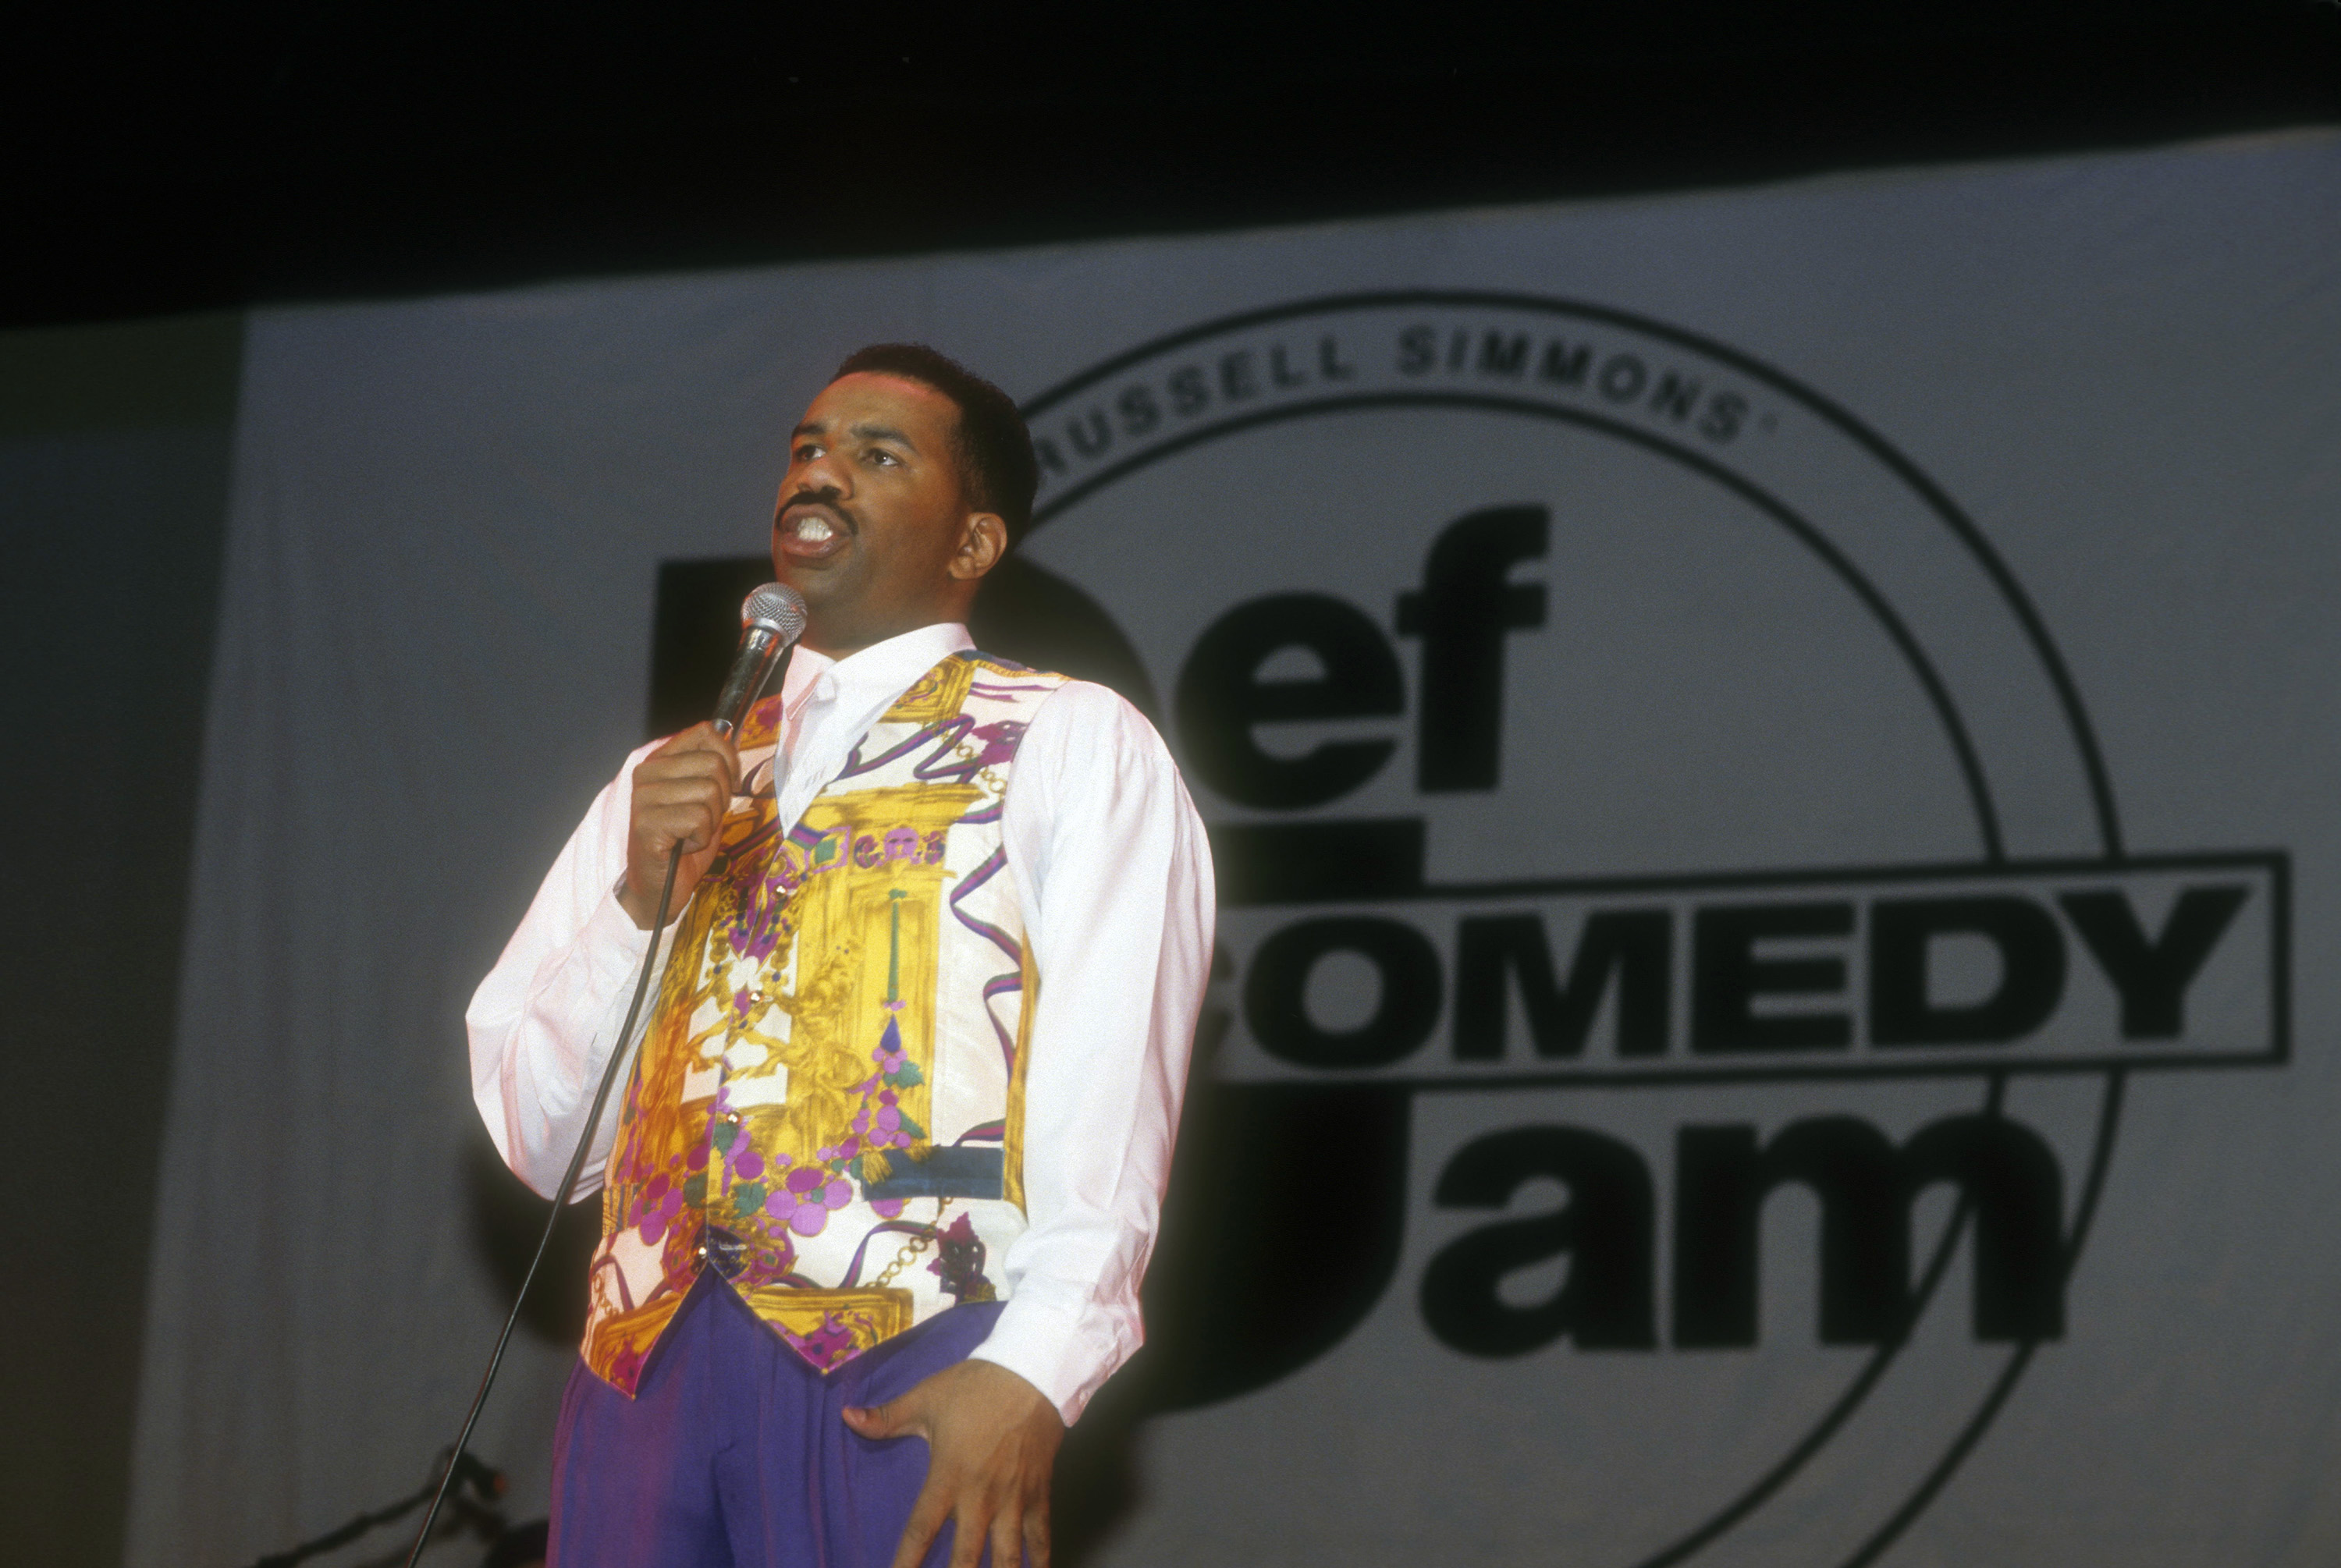 Steve Harvey performs at Russell Simmons' Def Comedy Jam in New York City on June 10, 1993 | Source: Getty Images